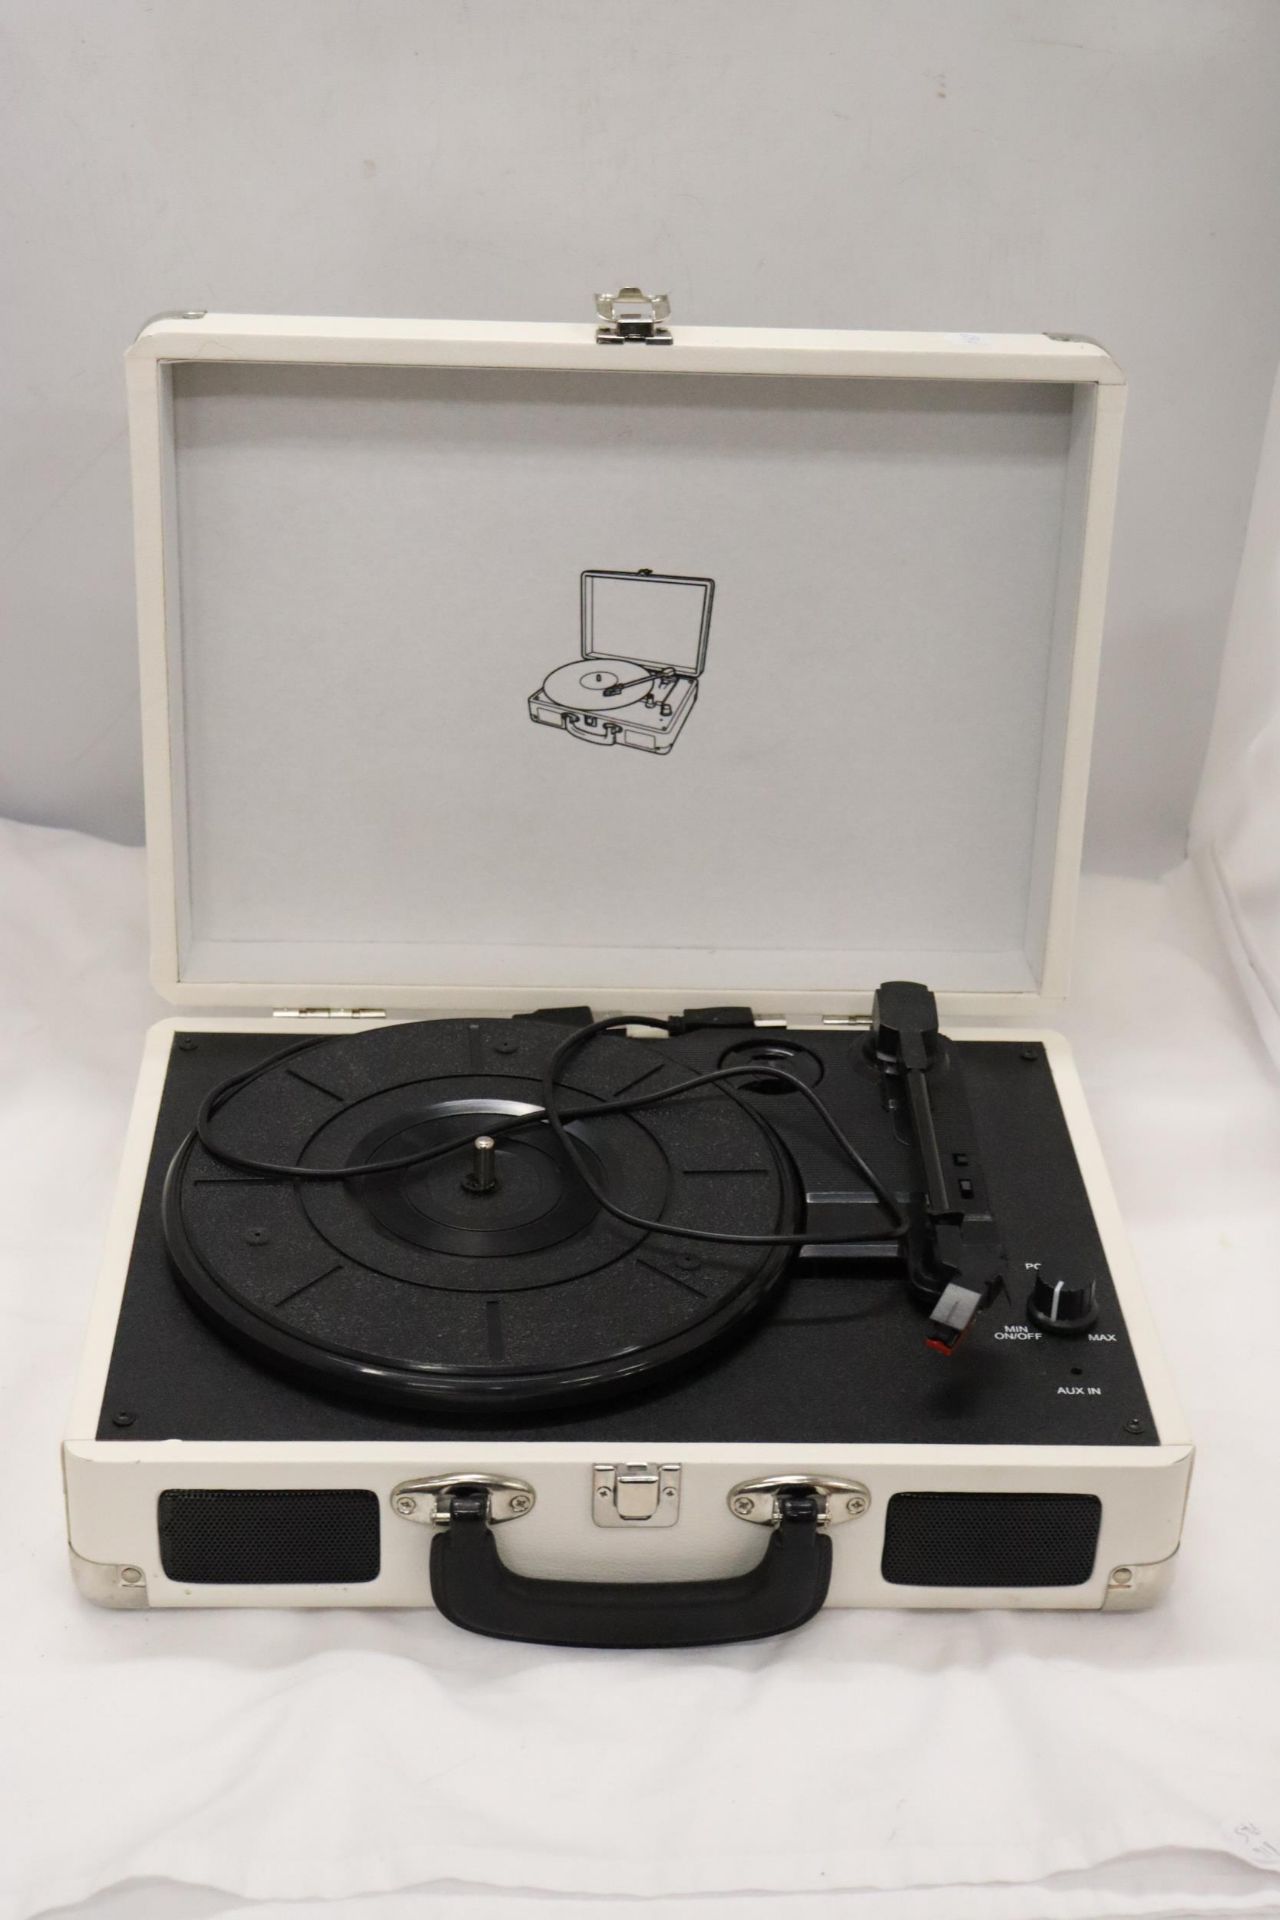 A MAXTEK 'SUITCASE' RECORD PLAYER WITH INSTRUCTIONS - Image 2 of 10